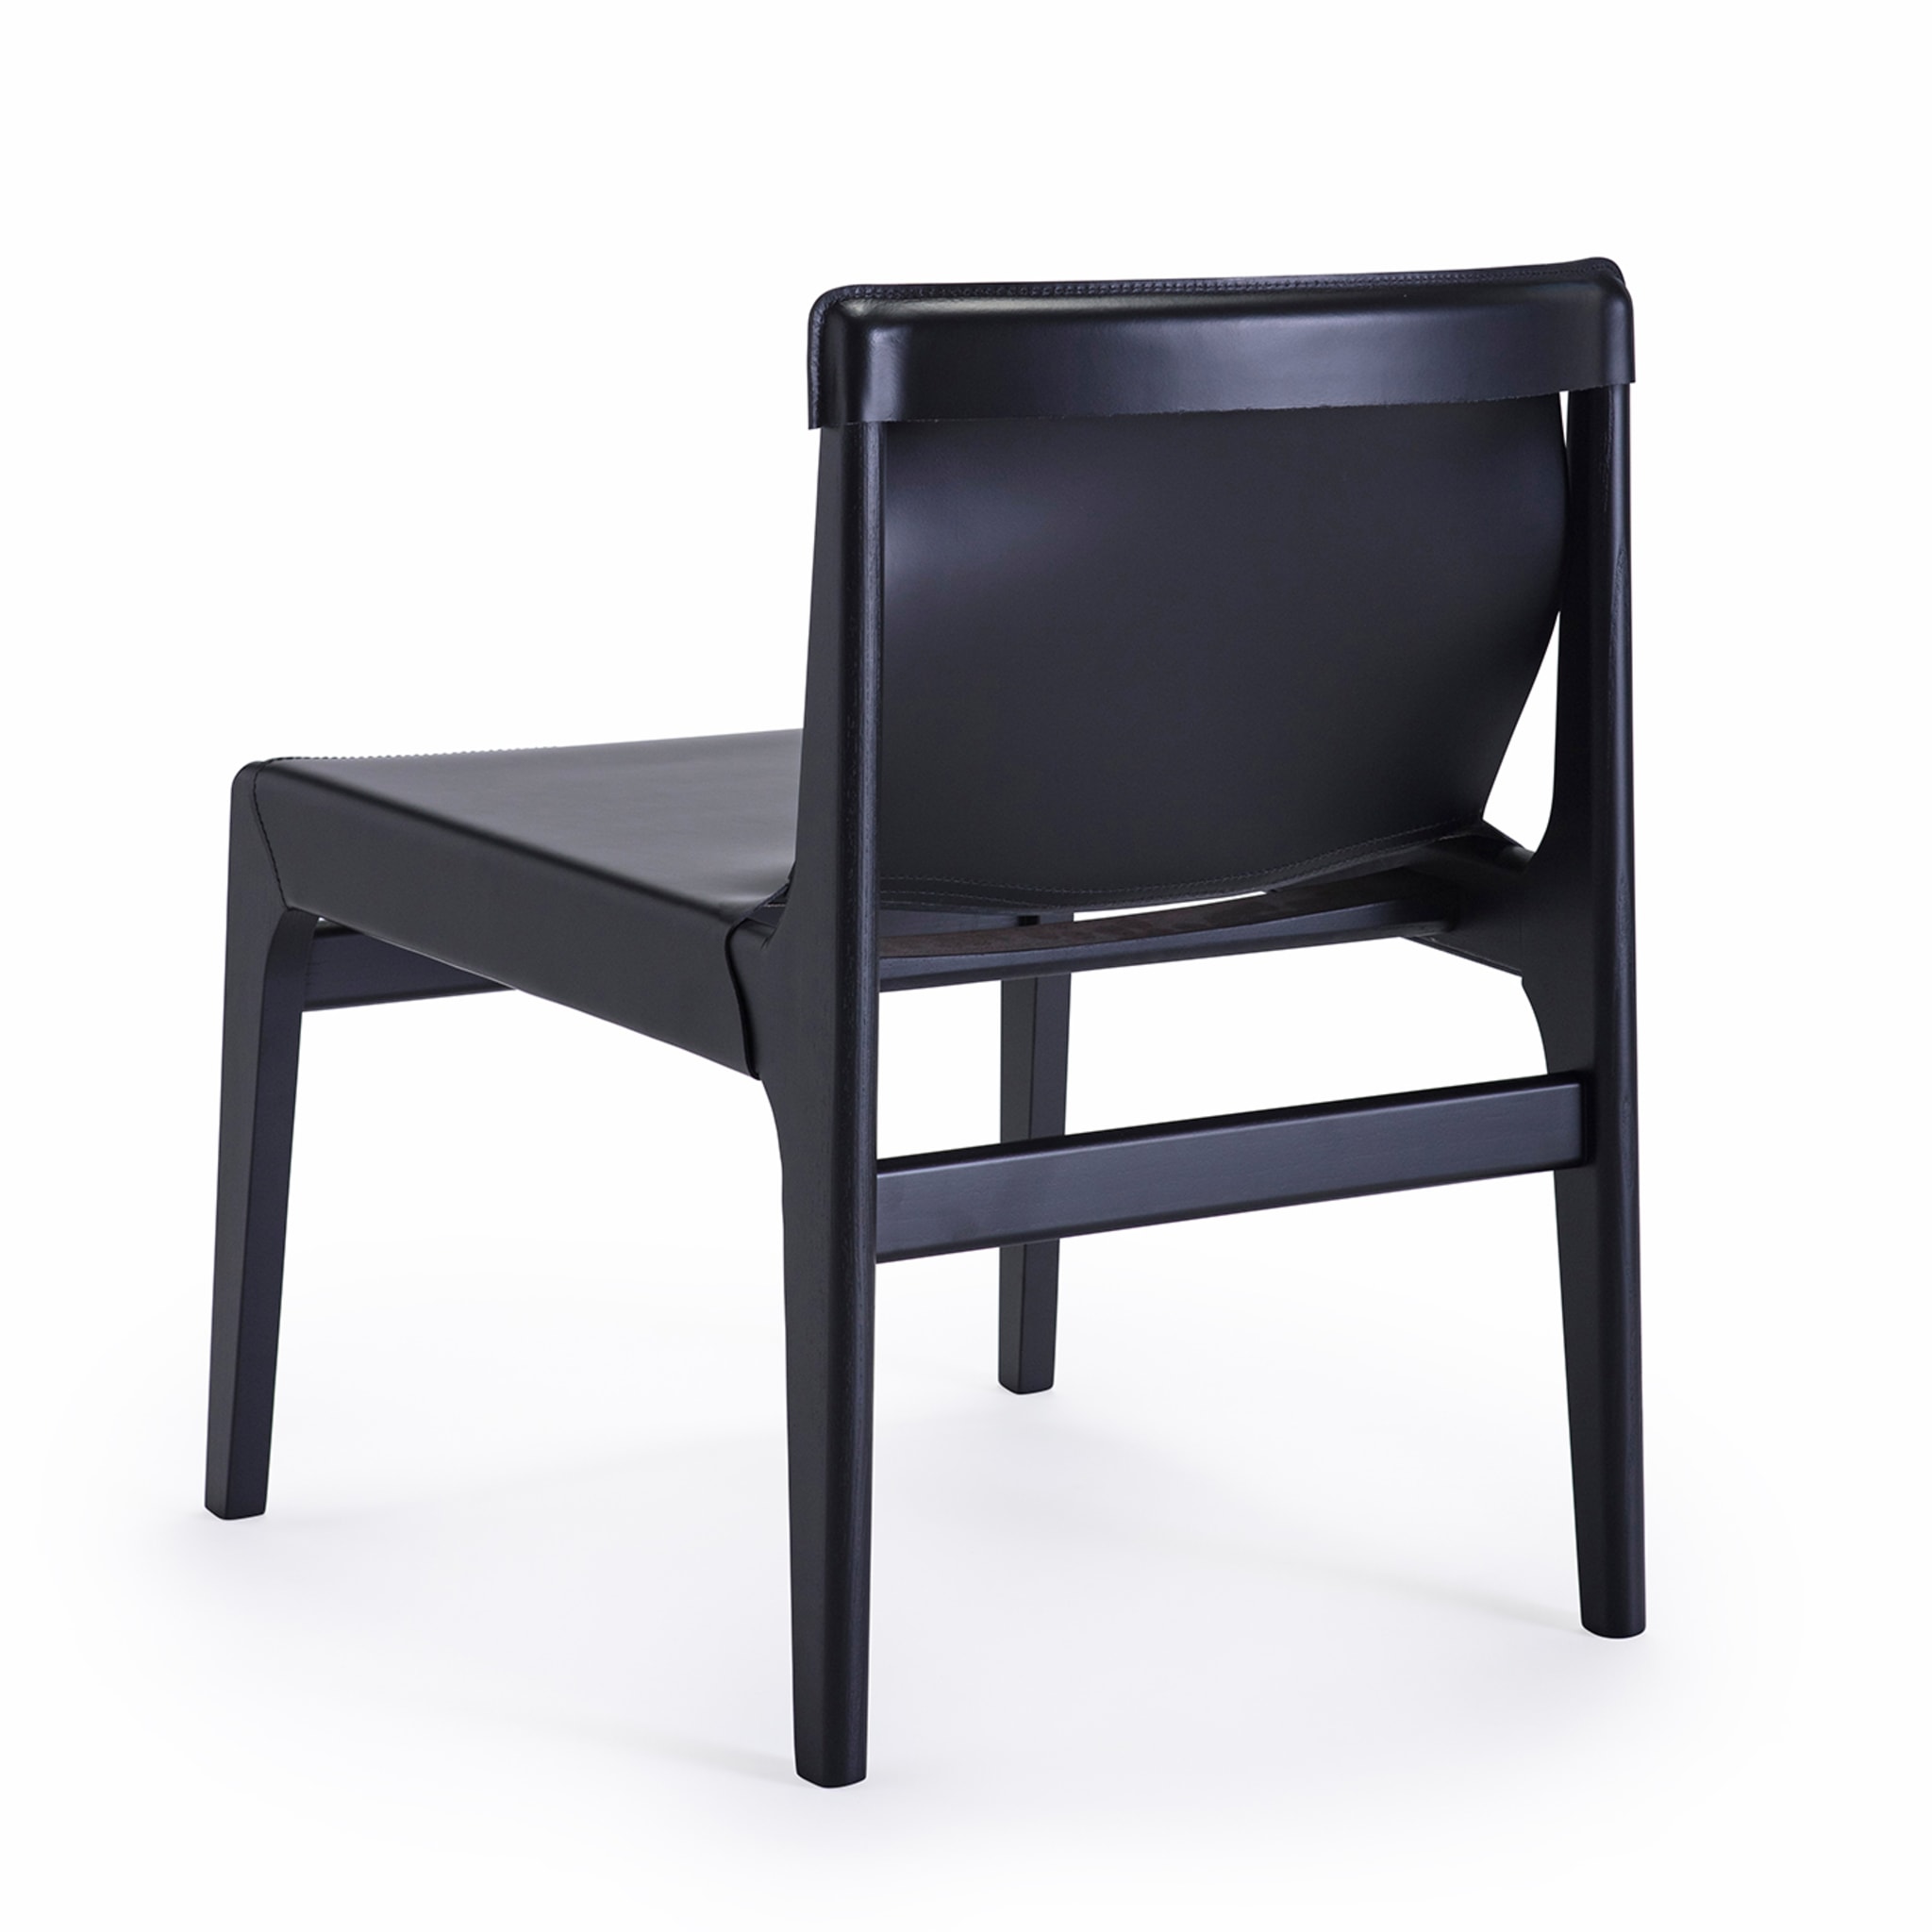 Burano Black Leather Lounge Chair by Balutto Associati - Alternative view 1